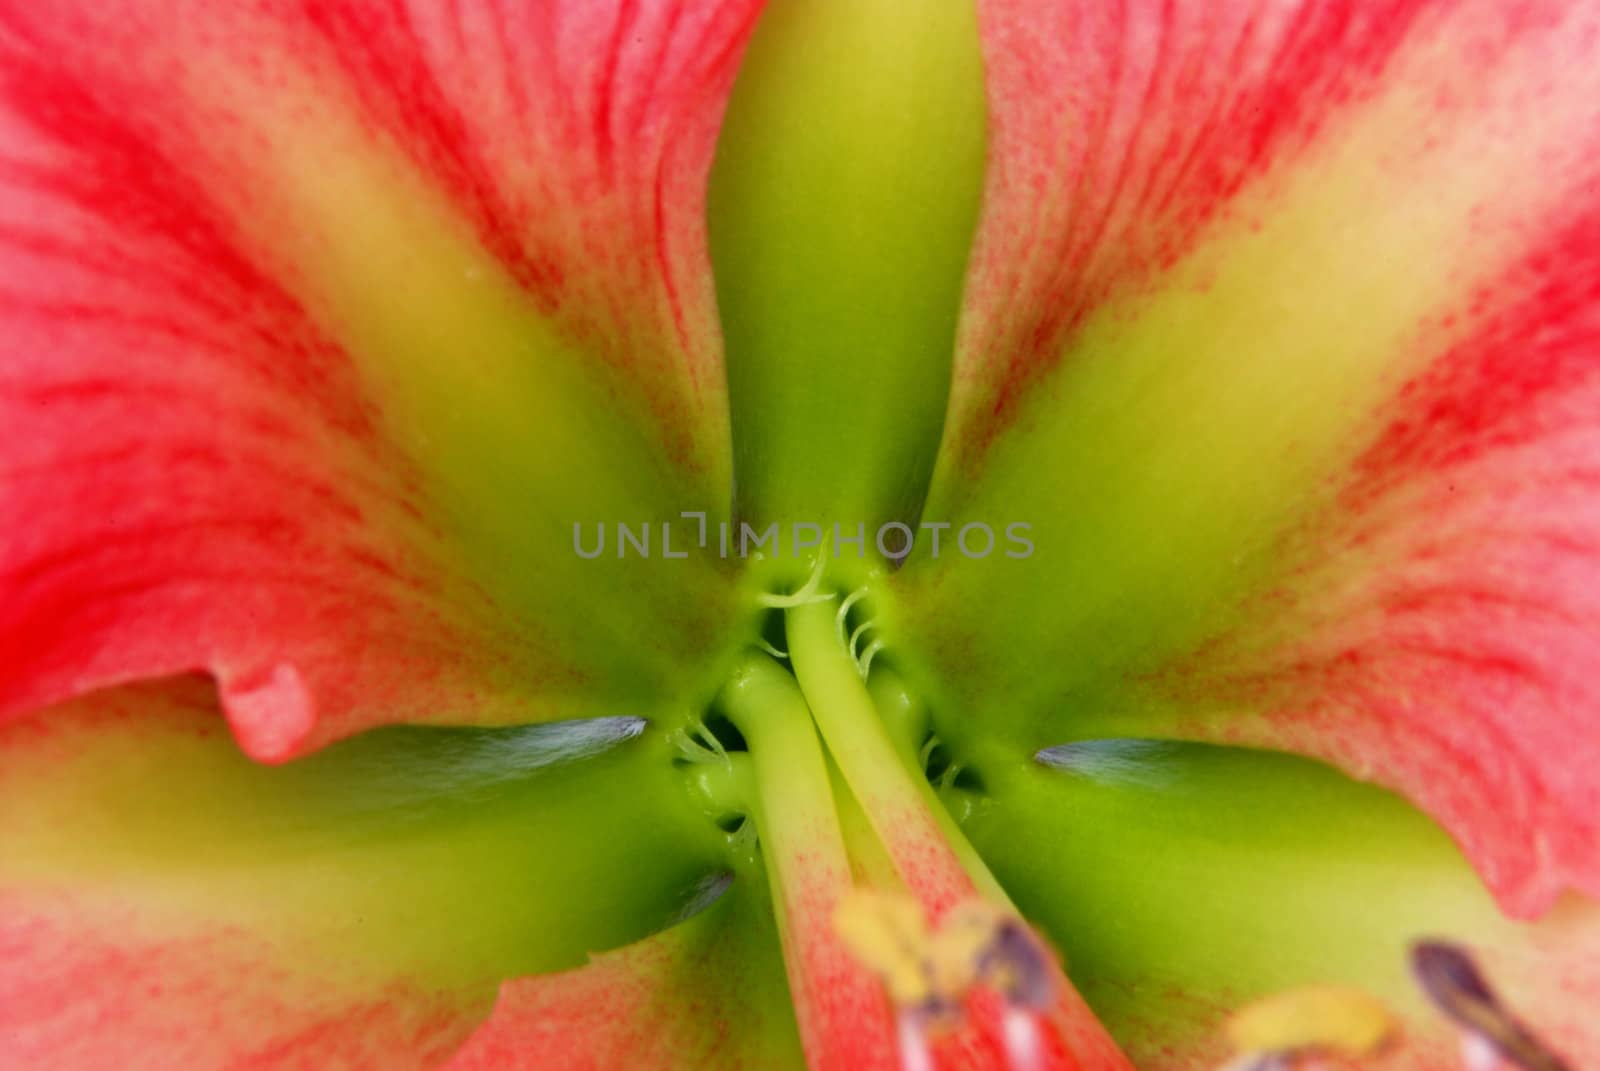 Amaryllis macro - detail of pink flower with green leaves - background